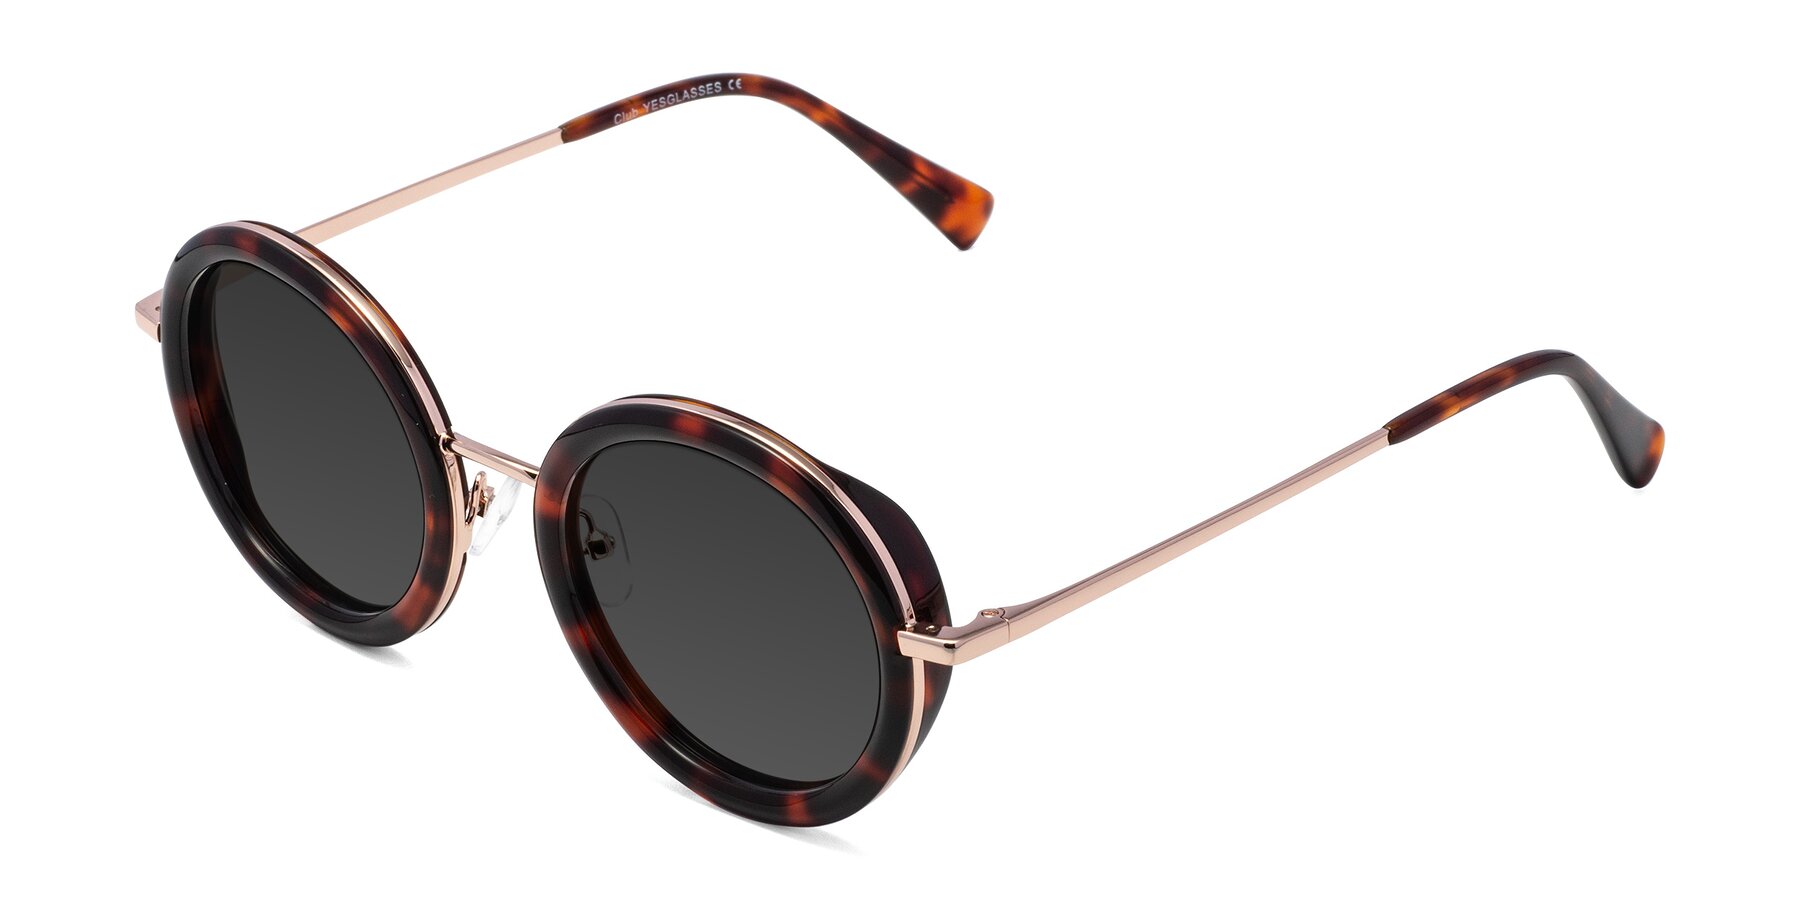 Angle of Club in Tortoise-Rose Gold with Gray Tinted Lenses